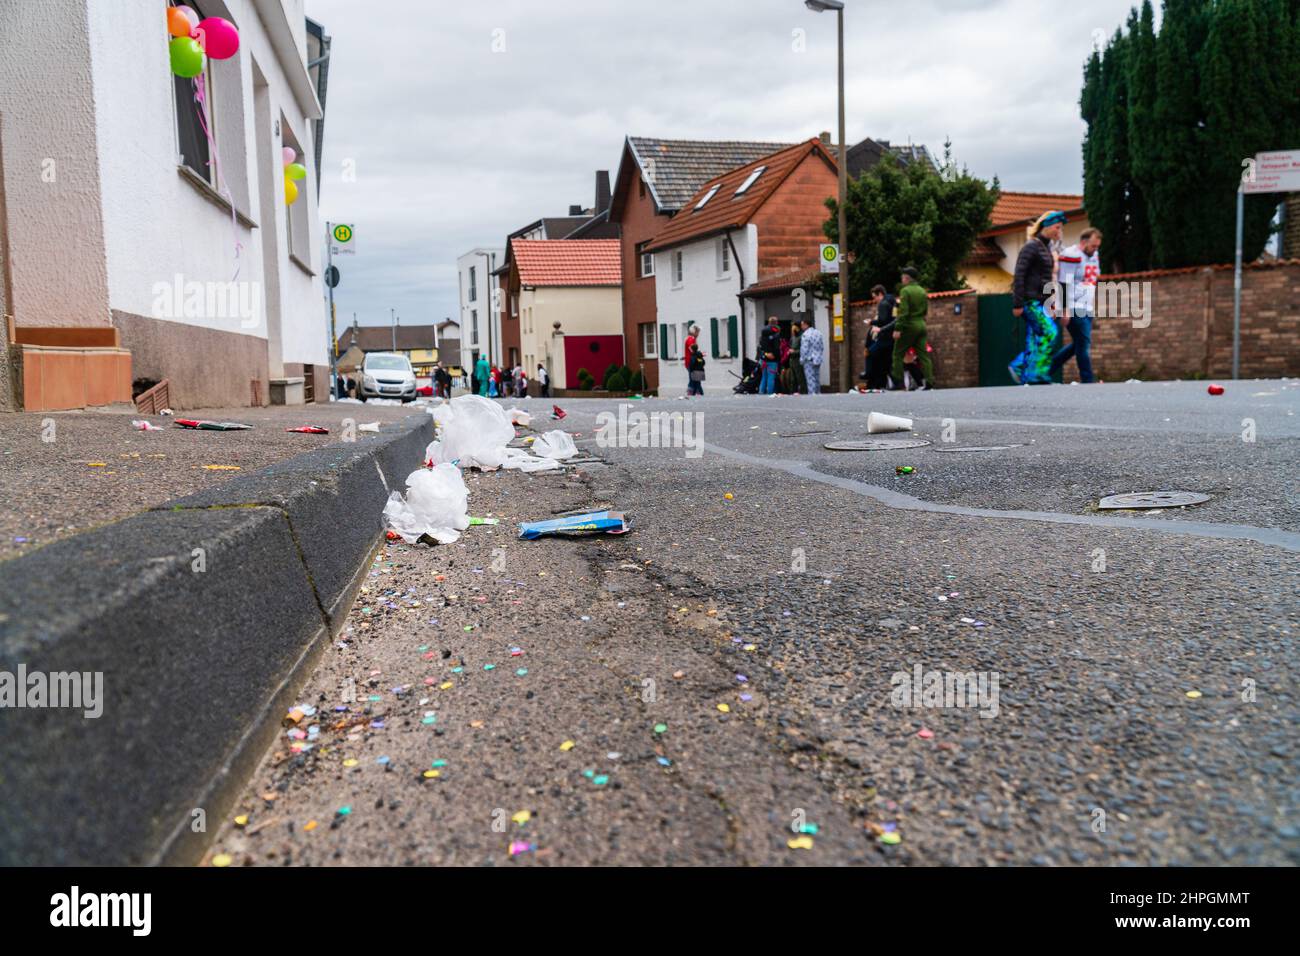 Bornheim, North Rhine-Westphalia, Germany - February 22, 2020: Trash recklessly dumped on the street after a carnival parade. People wearing costumes. Stock Photo